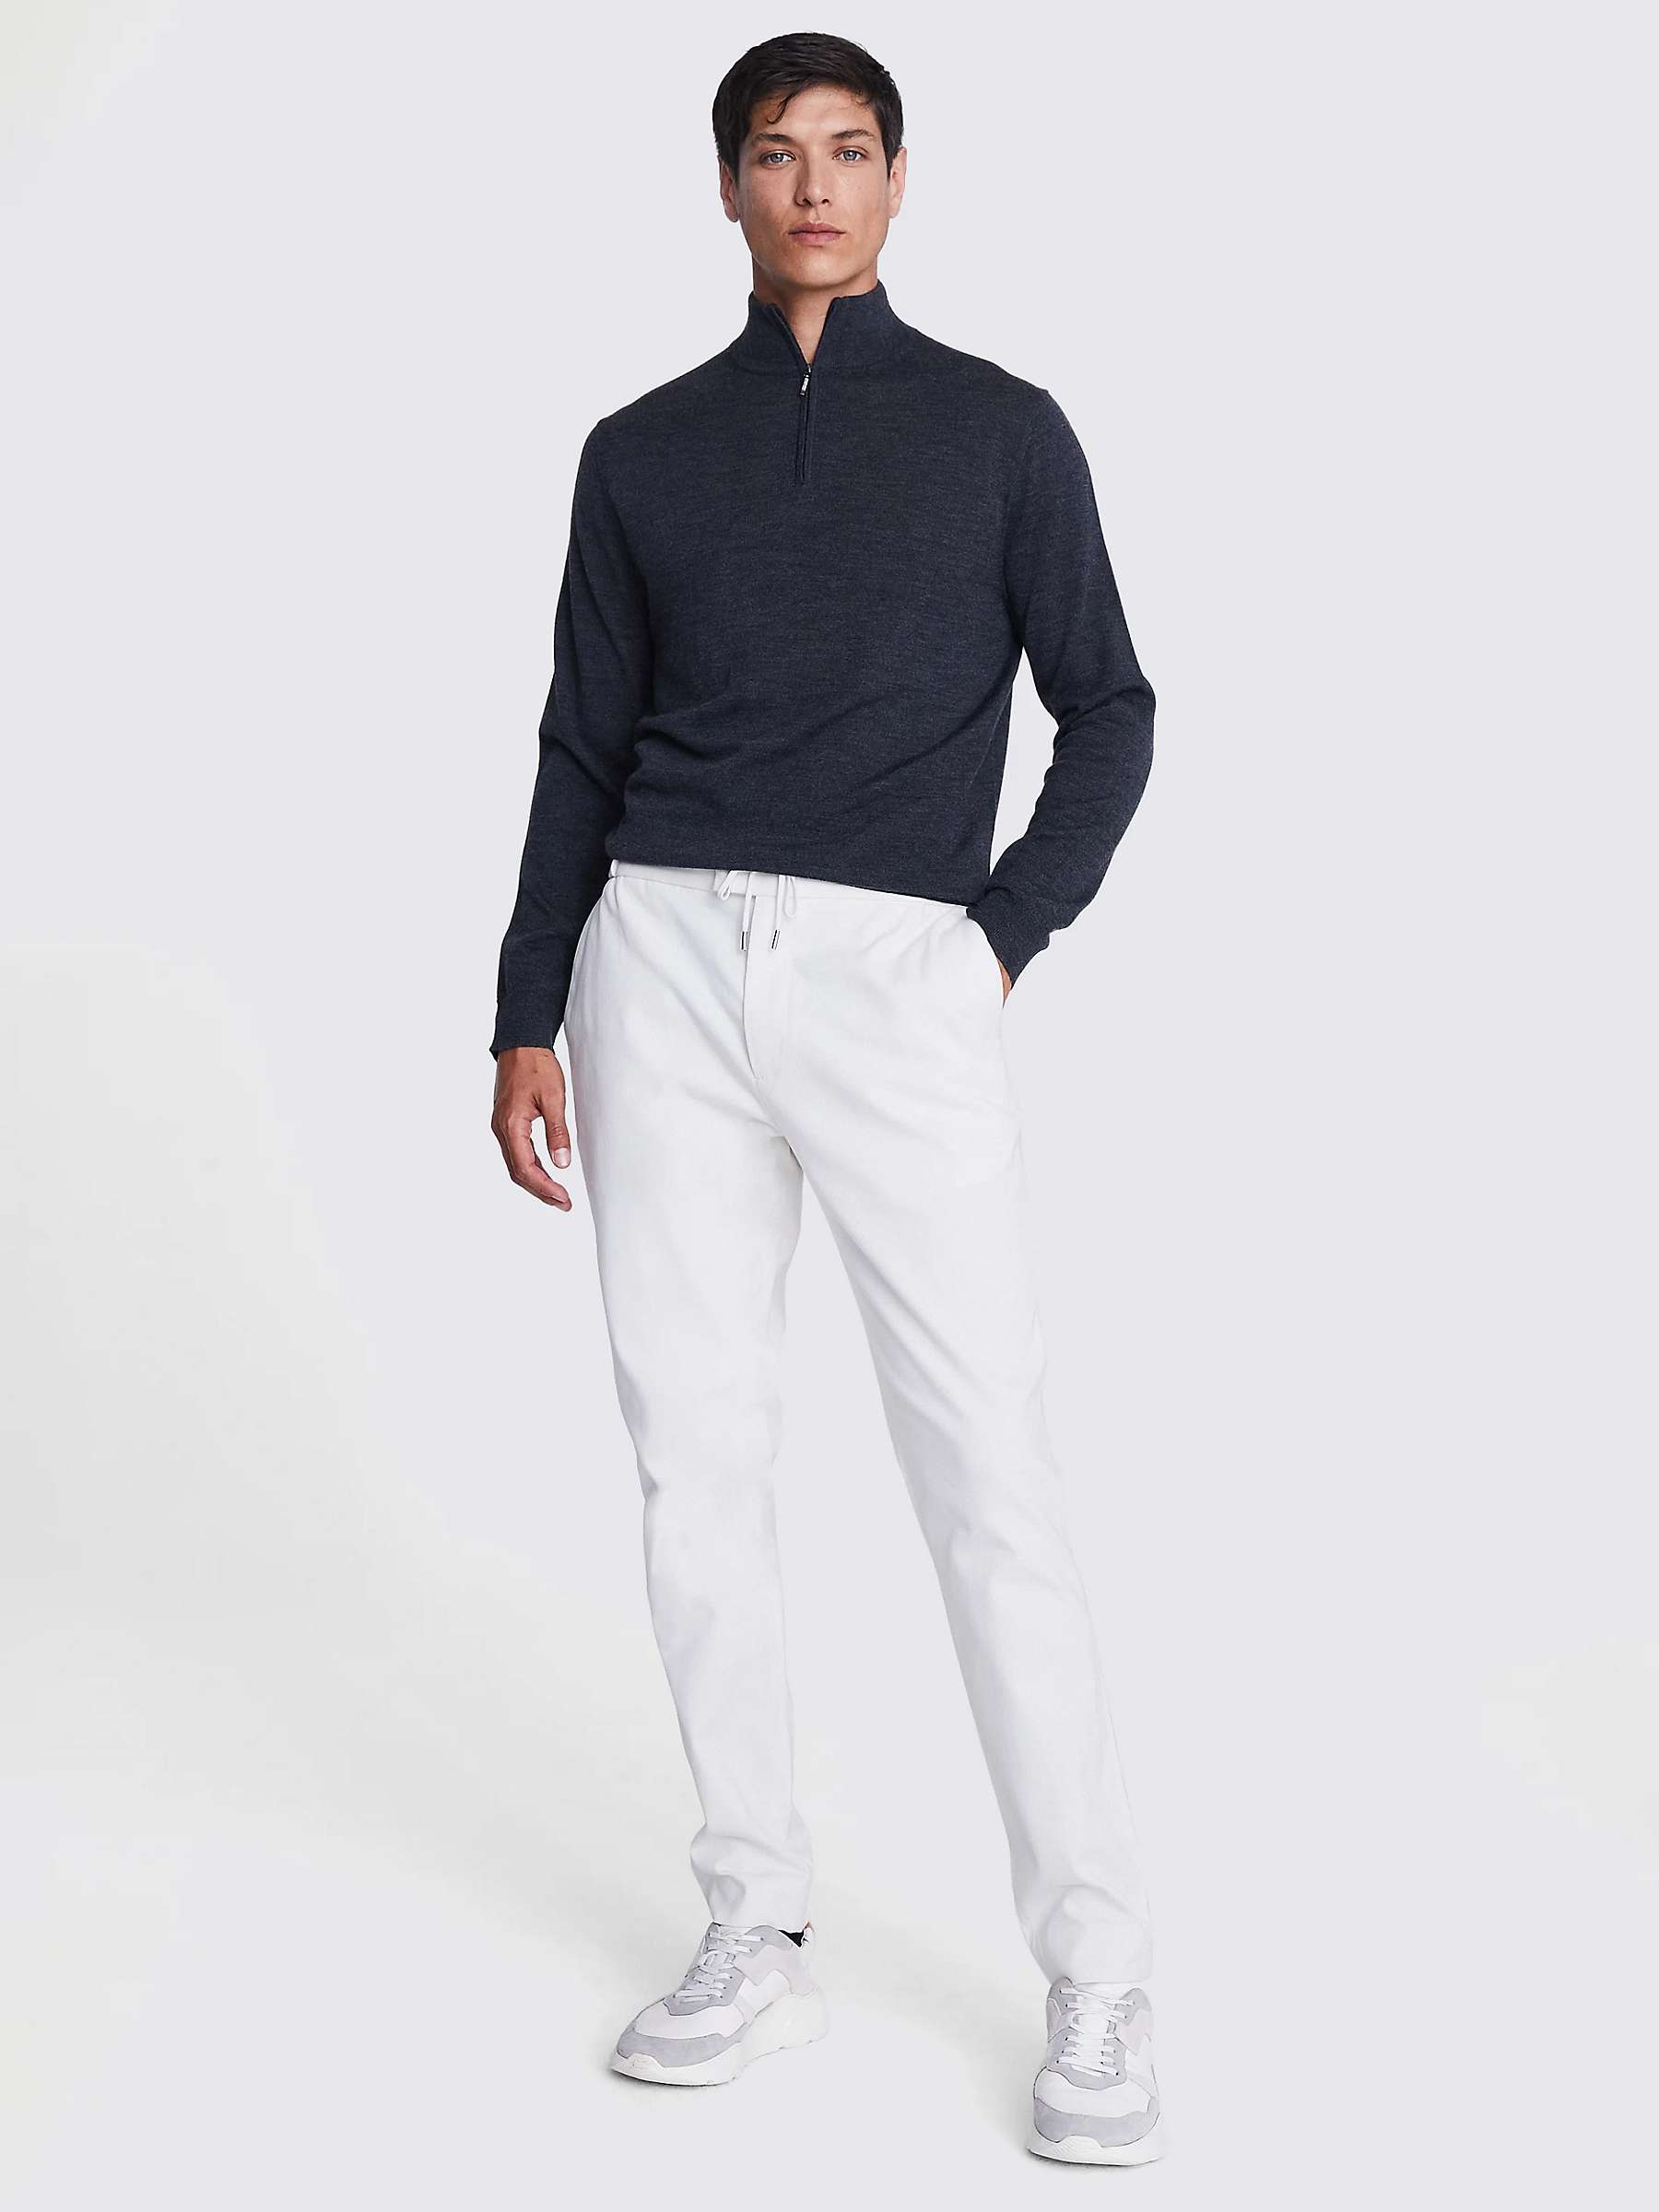 Buy Moss Twill Drawstring Trousers Online at johnlewis.com